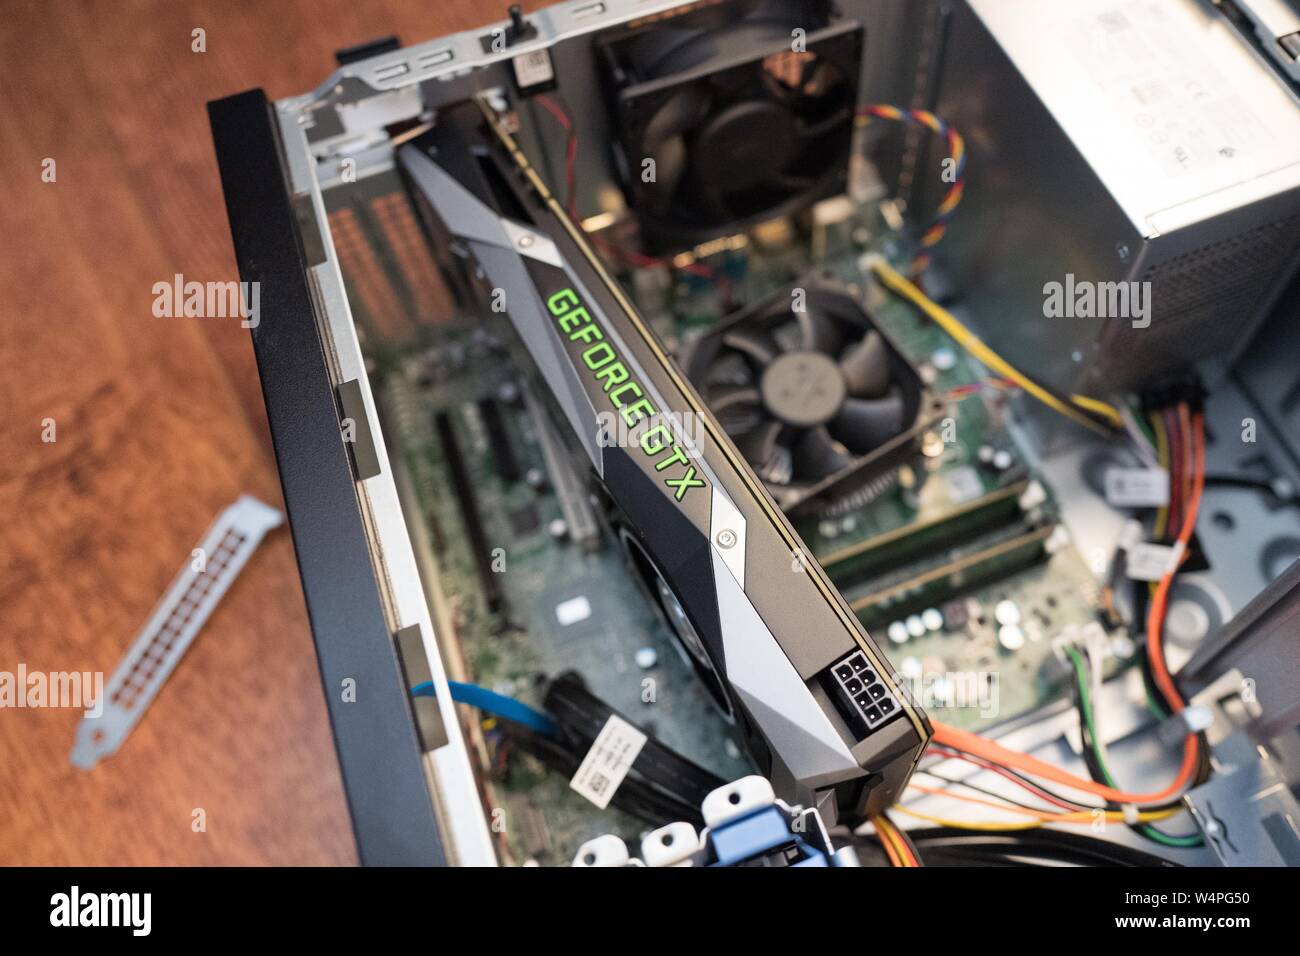 New Nvidia 1070 GTX Graphical Processing Unit (GPU), aka graphics card, being installed in a cryptocurrency mining computer for mining Bitcoin alternatives, San Ramon, California, August 29, 2018. () Stock Photo